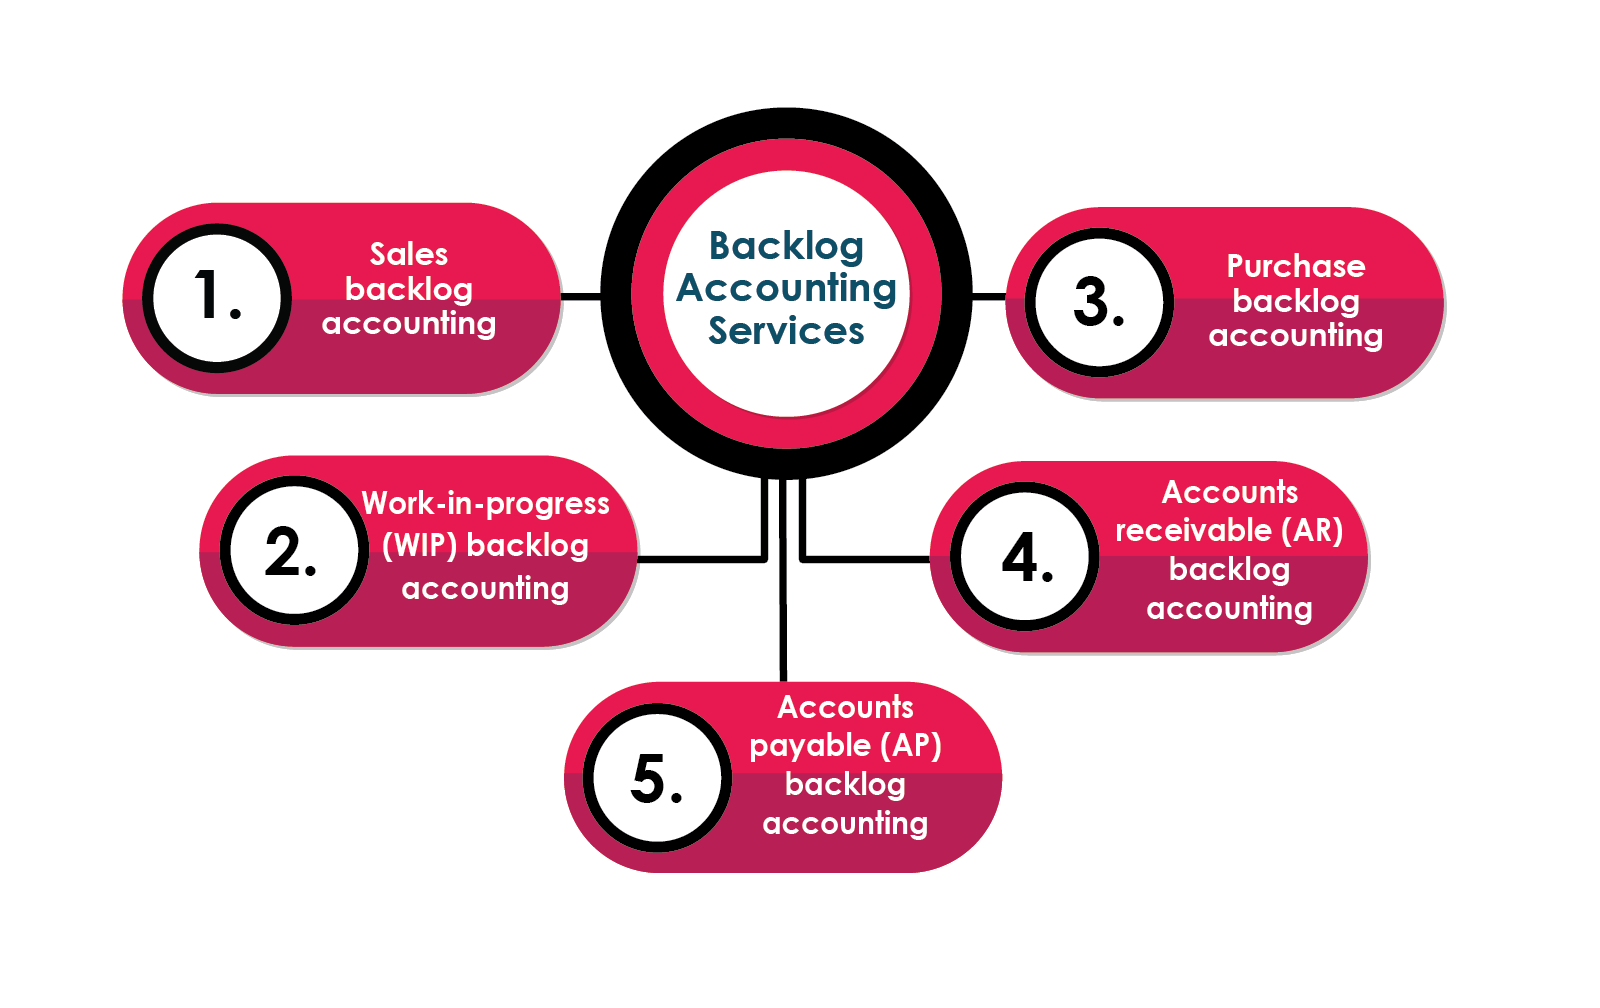 infographic representation of types of Backlog accounting and services